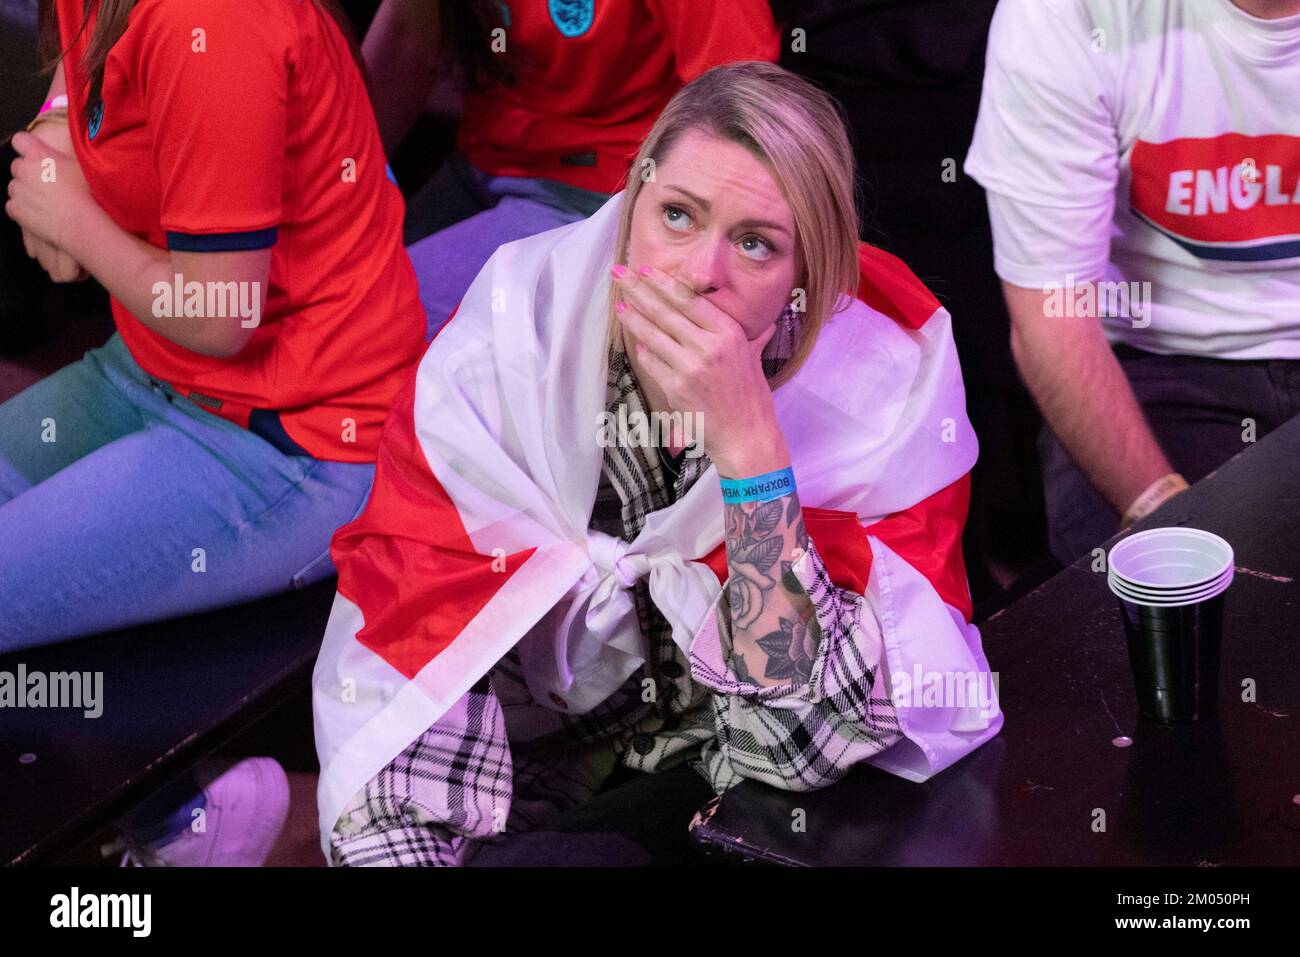 England football fans watch the World Cup match between England and USA tonight at Boxpark, Wembley in London. Fans appear frustrated and disappointed Stock Photo